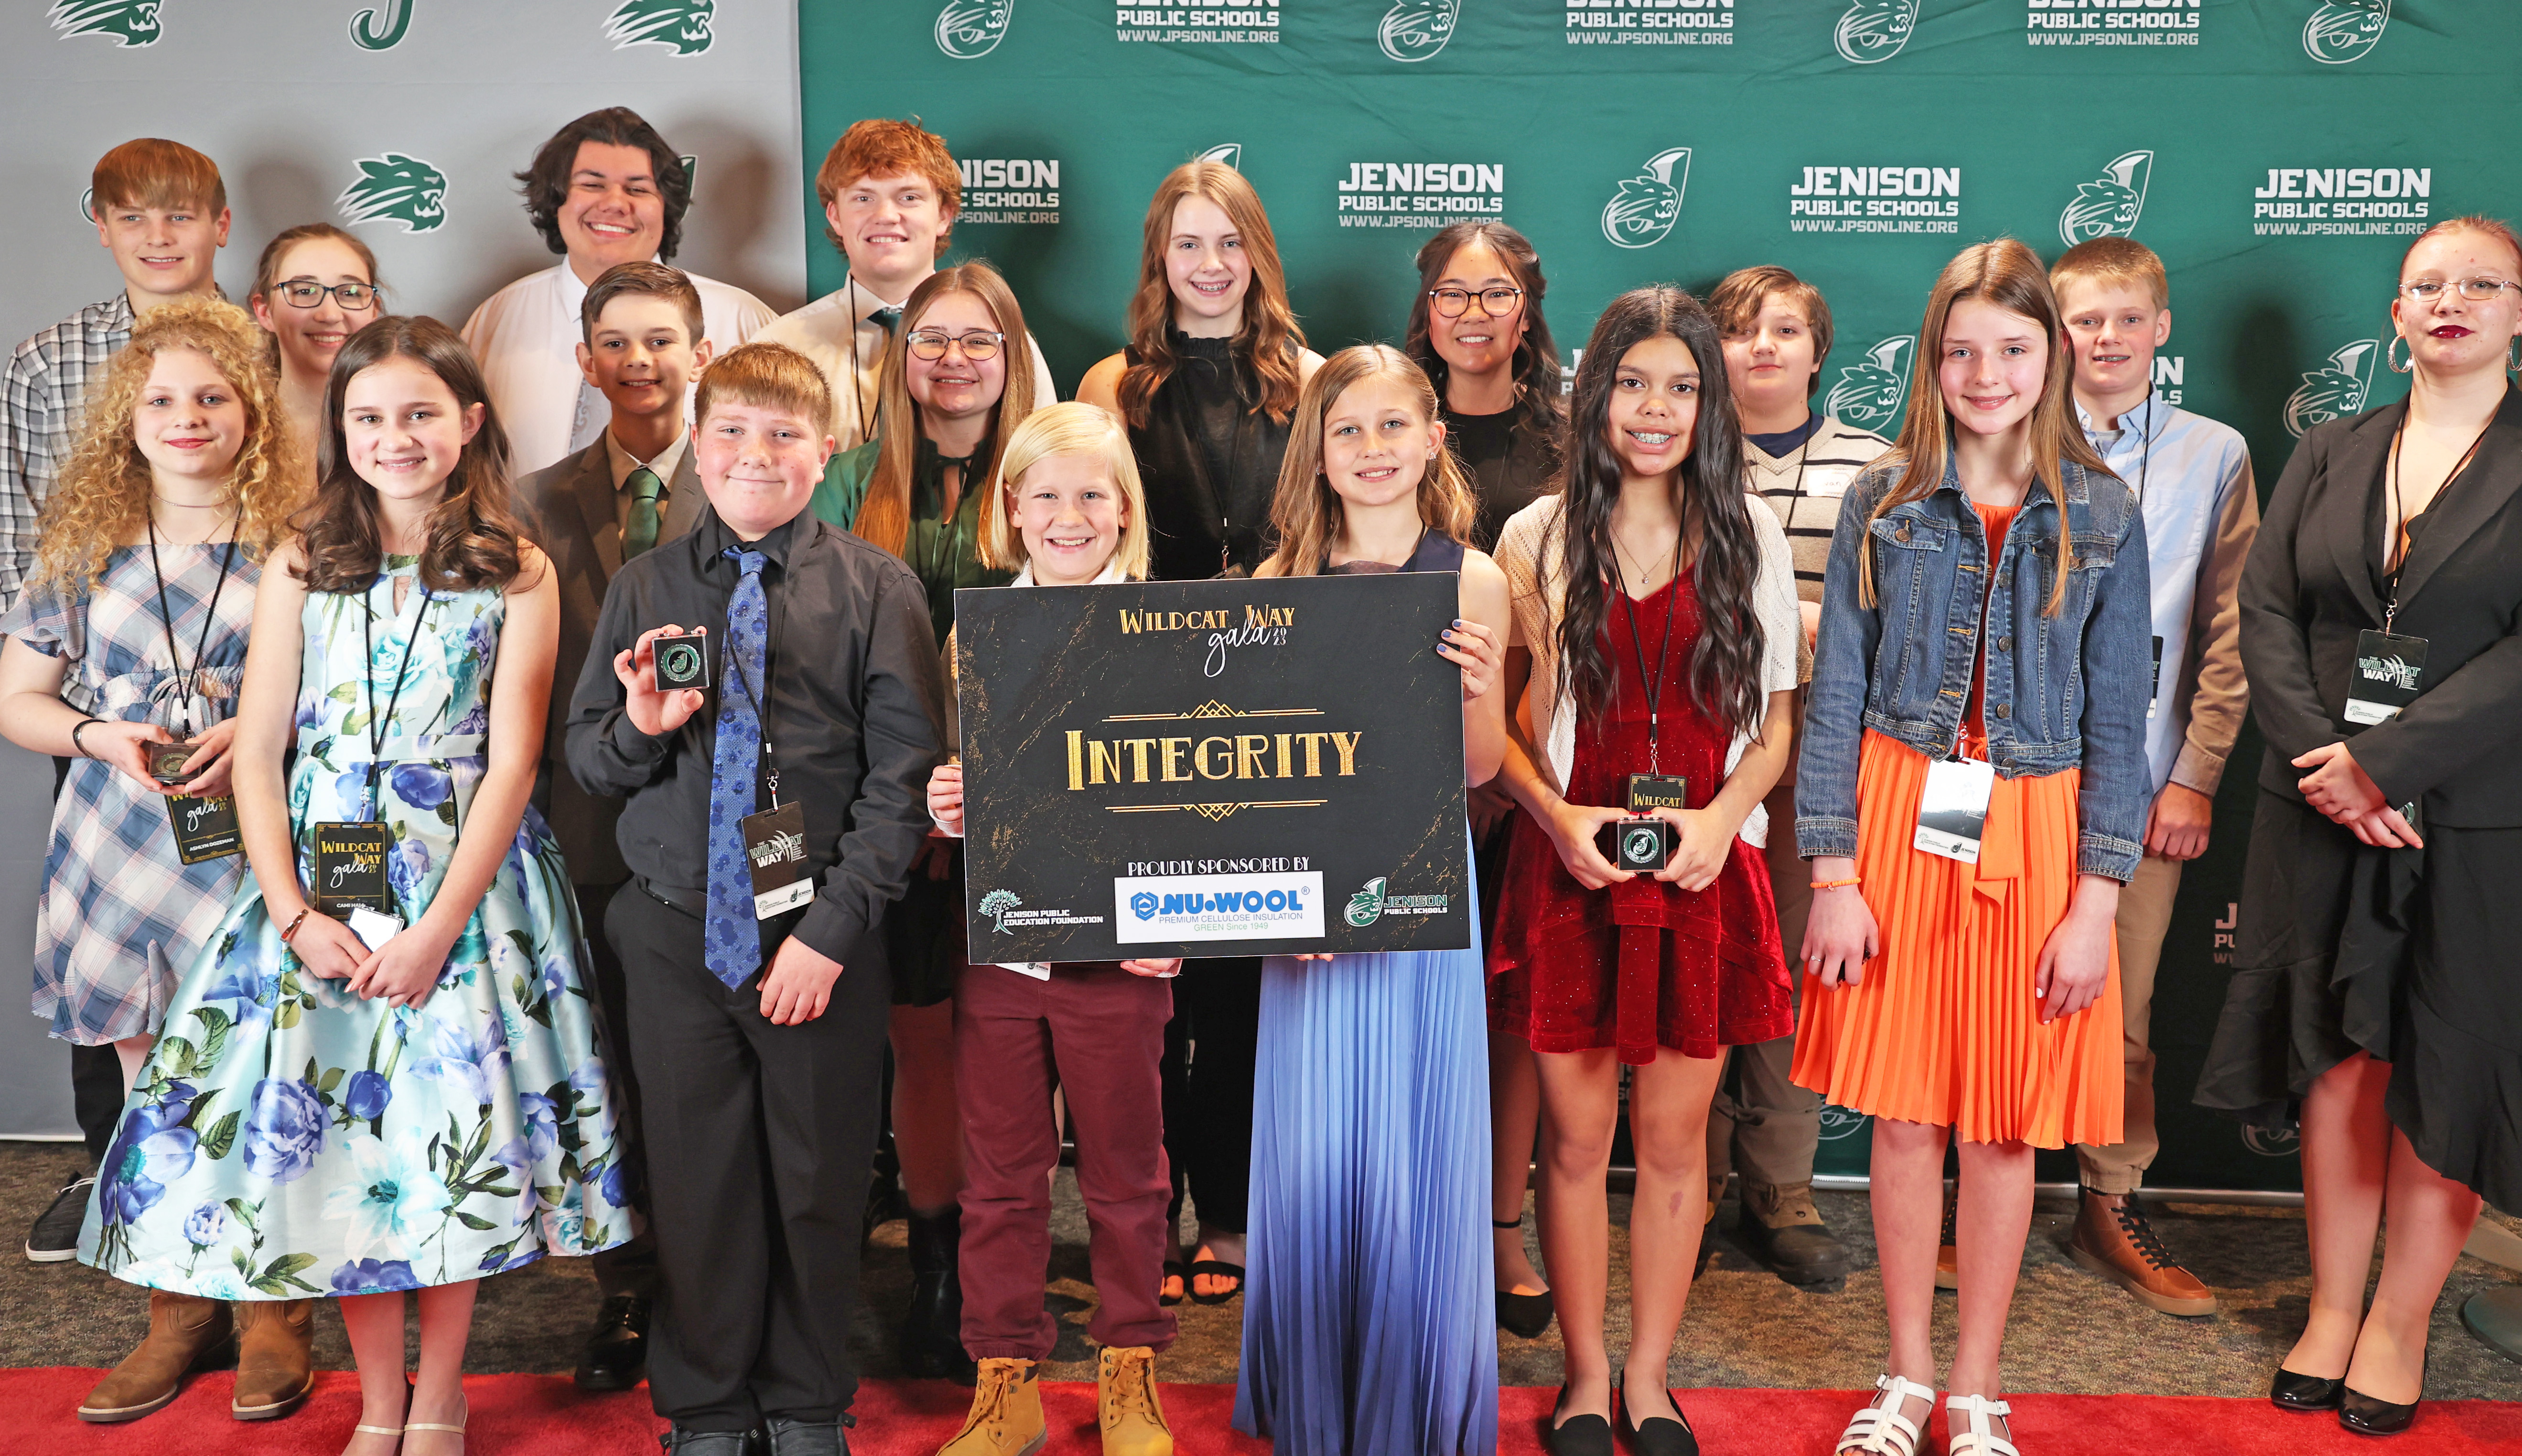 A group of students are photographed, being recognized for the "Integrity" characteristic trait, as part of "The Wildcat Way".